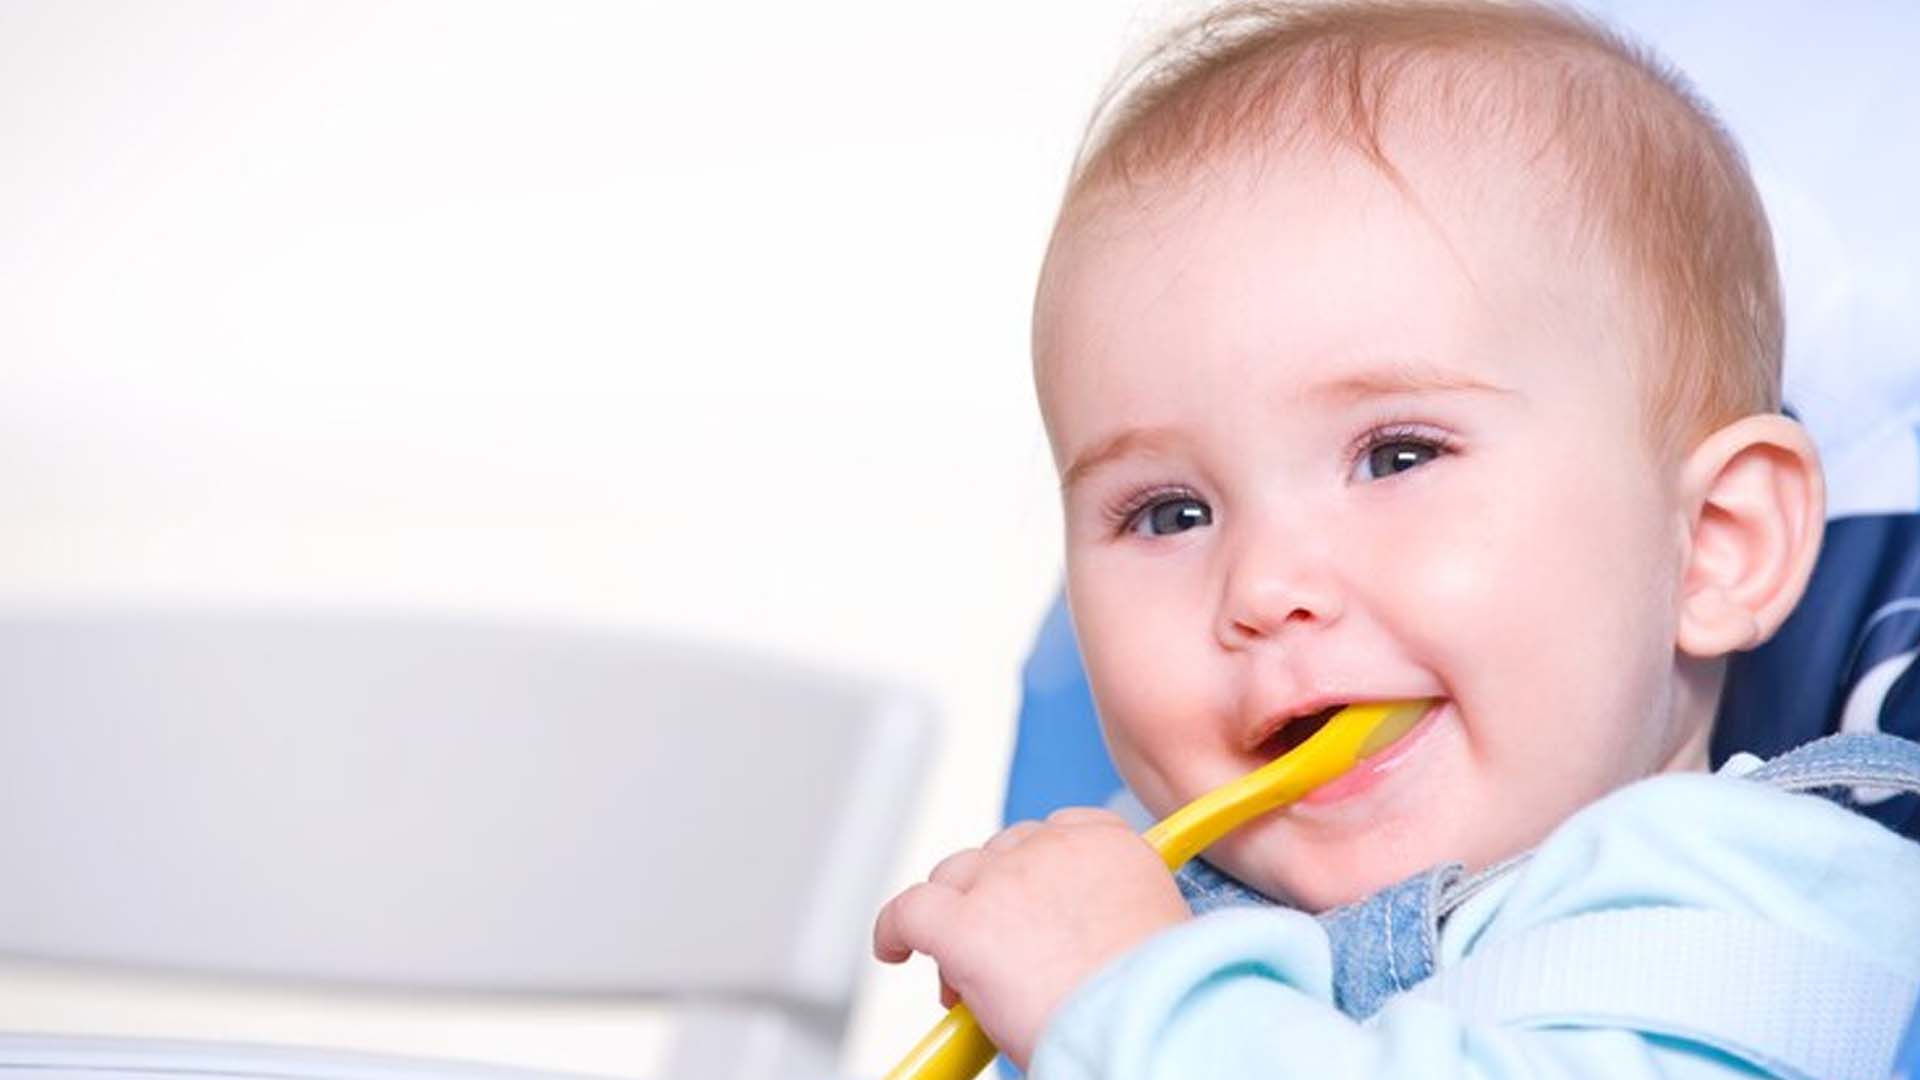 What are the Home Remedies to help with Teething Babies?